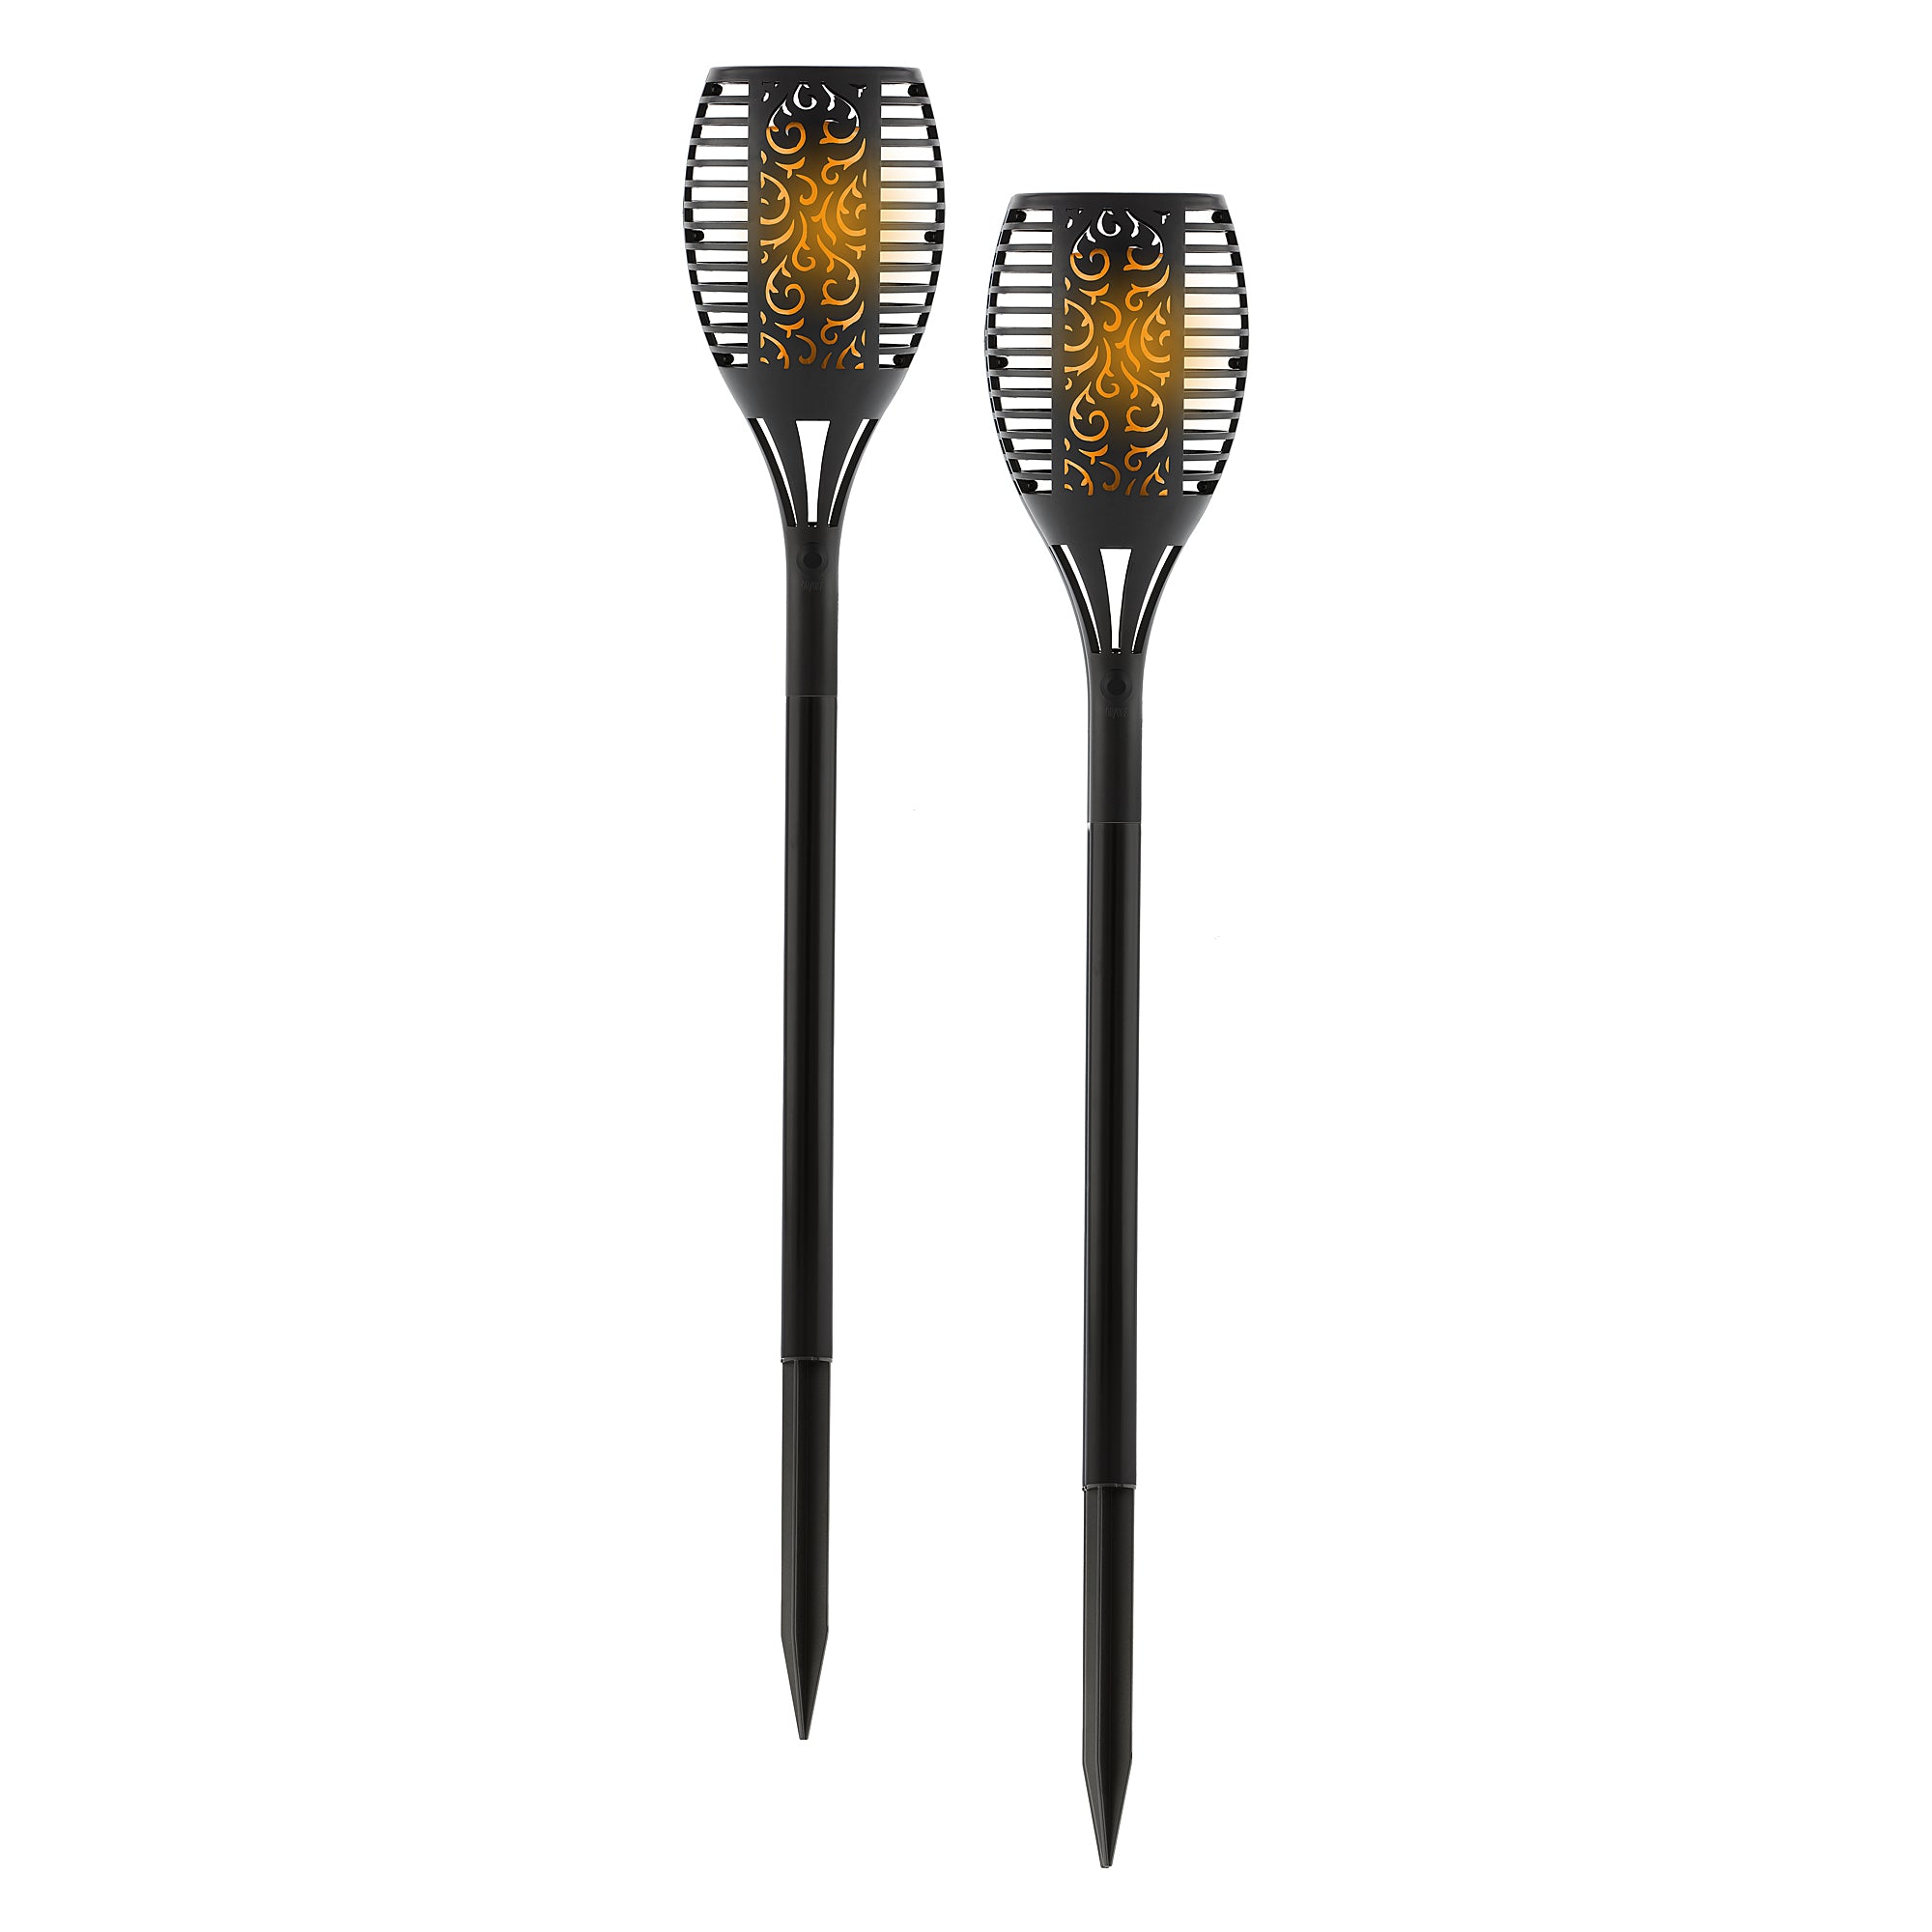 Olympia Solar Flame Torch Lights - Flicker Flame LEDs (Set of 2